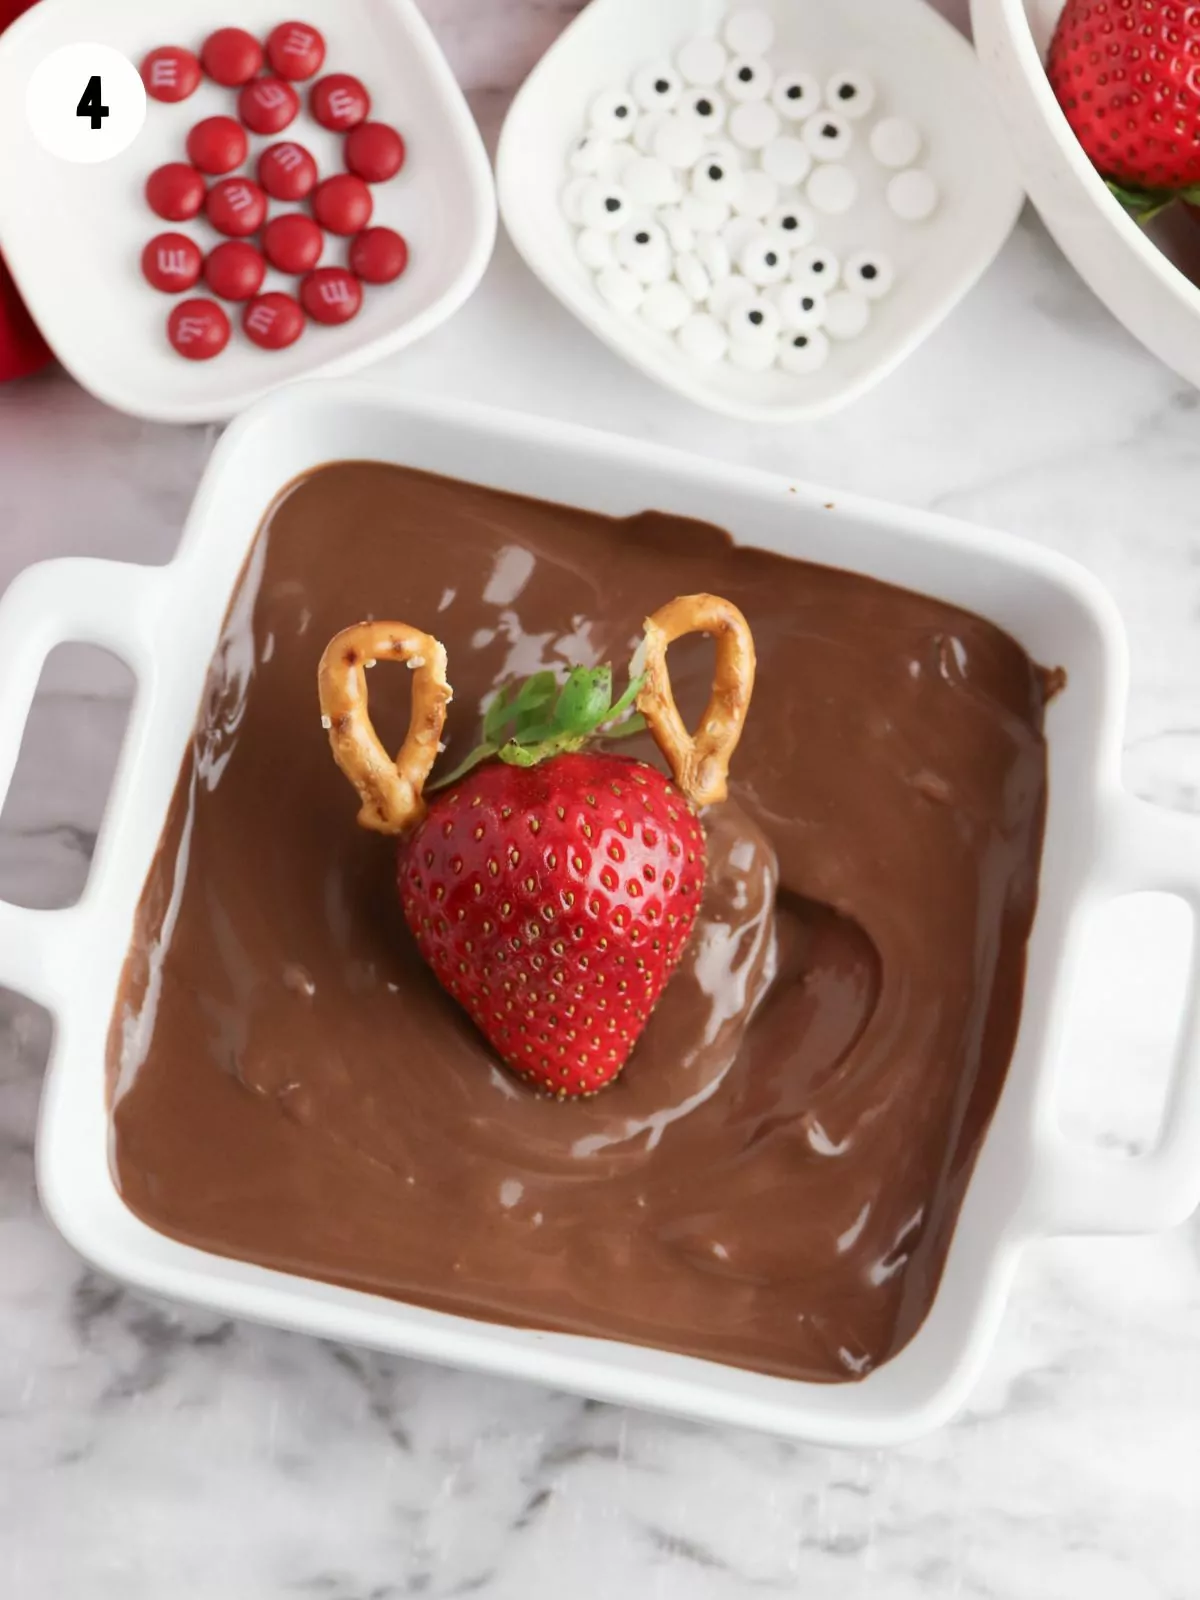 Dip strawberries in melted chocolate.